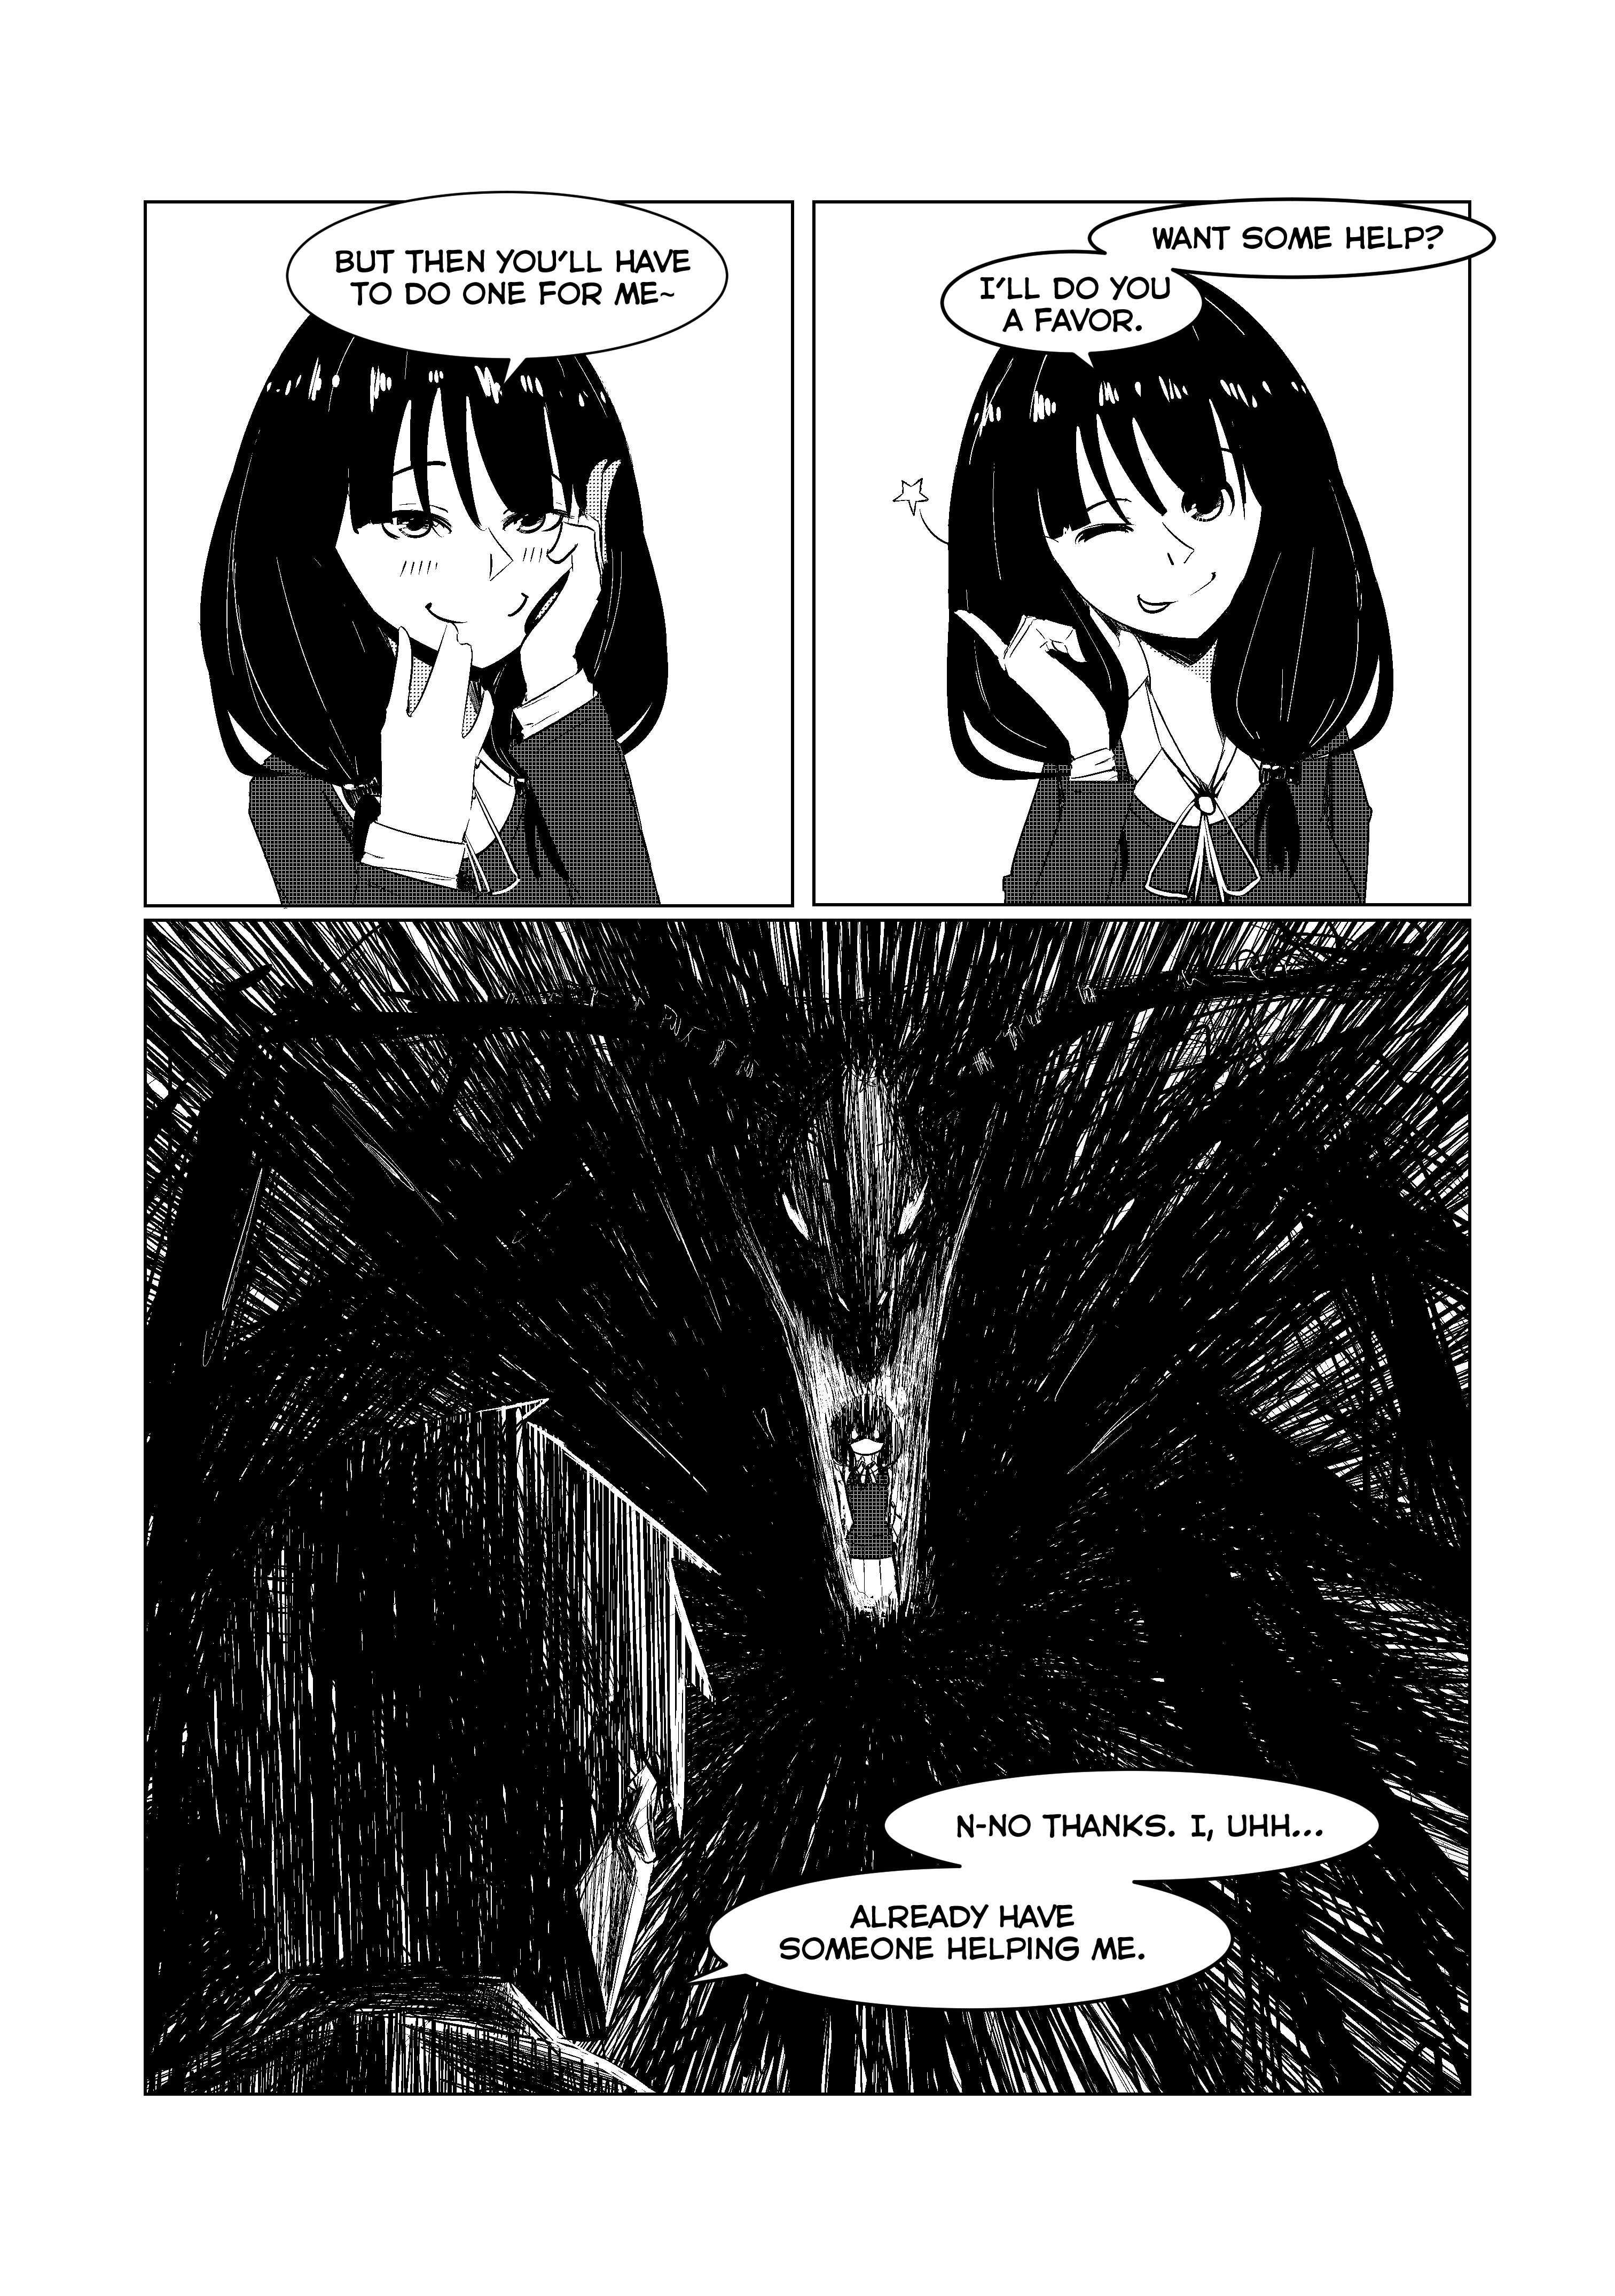 Opposites In Disguise - 1 page 33